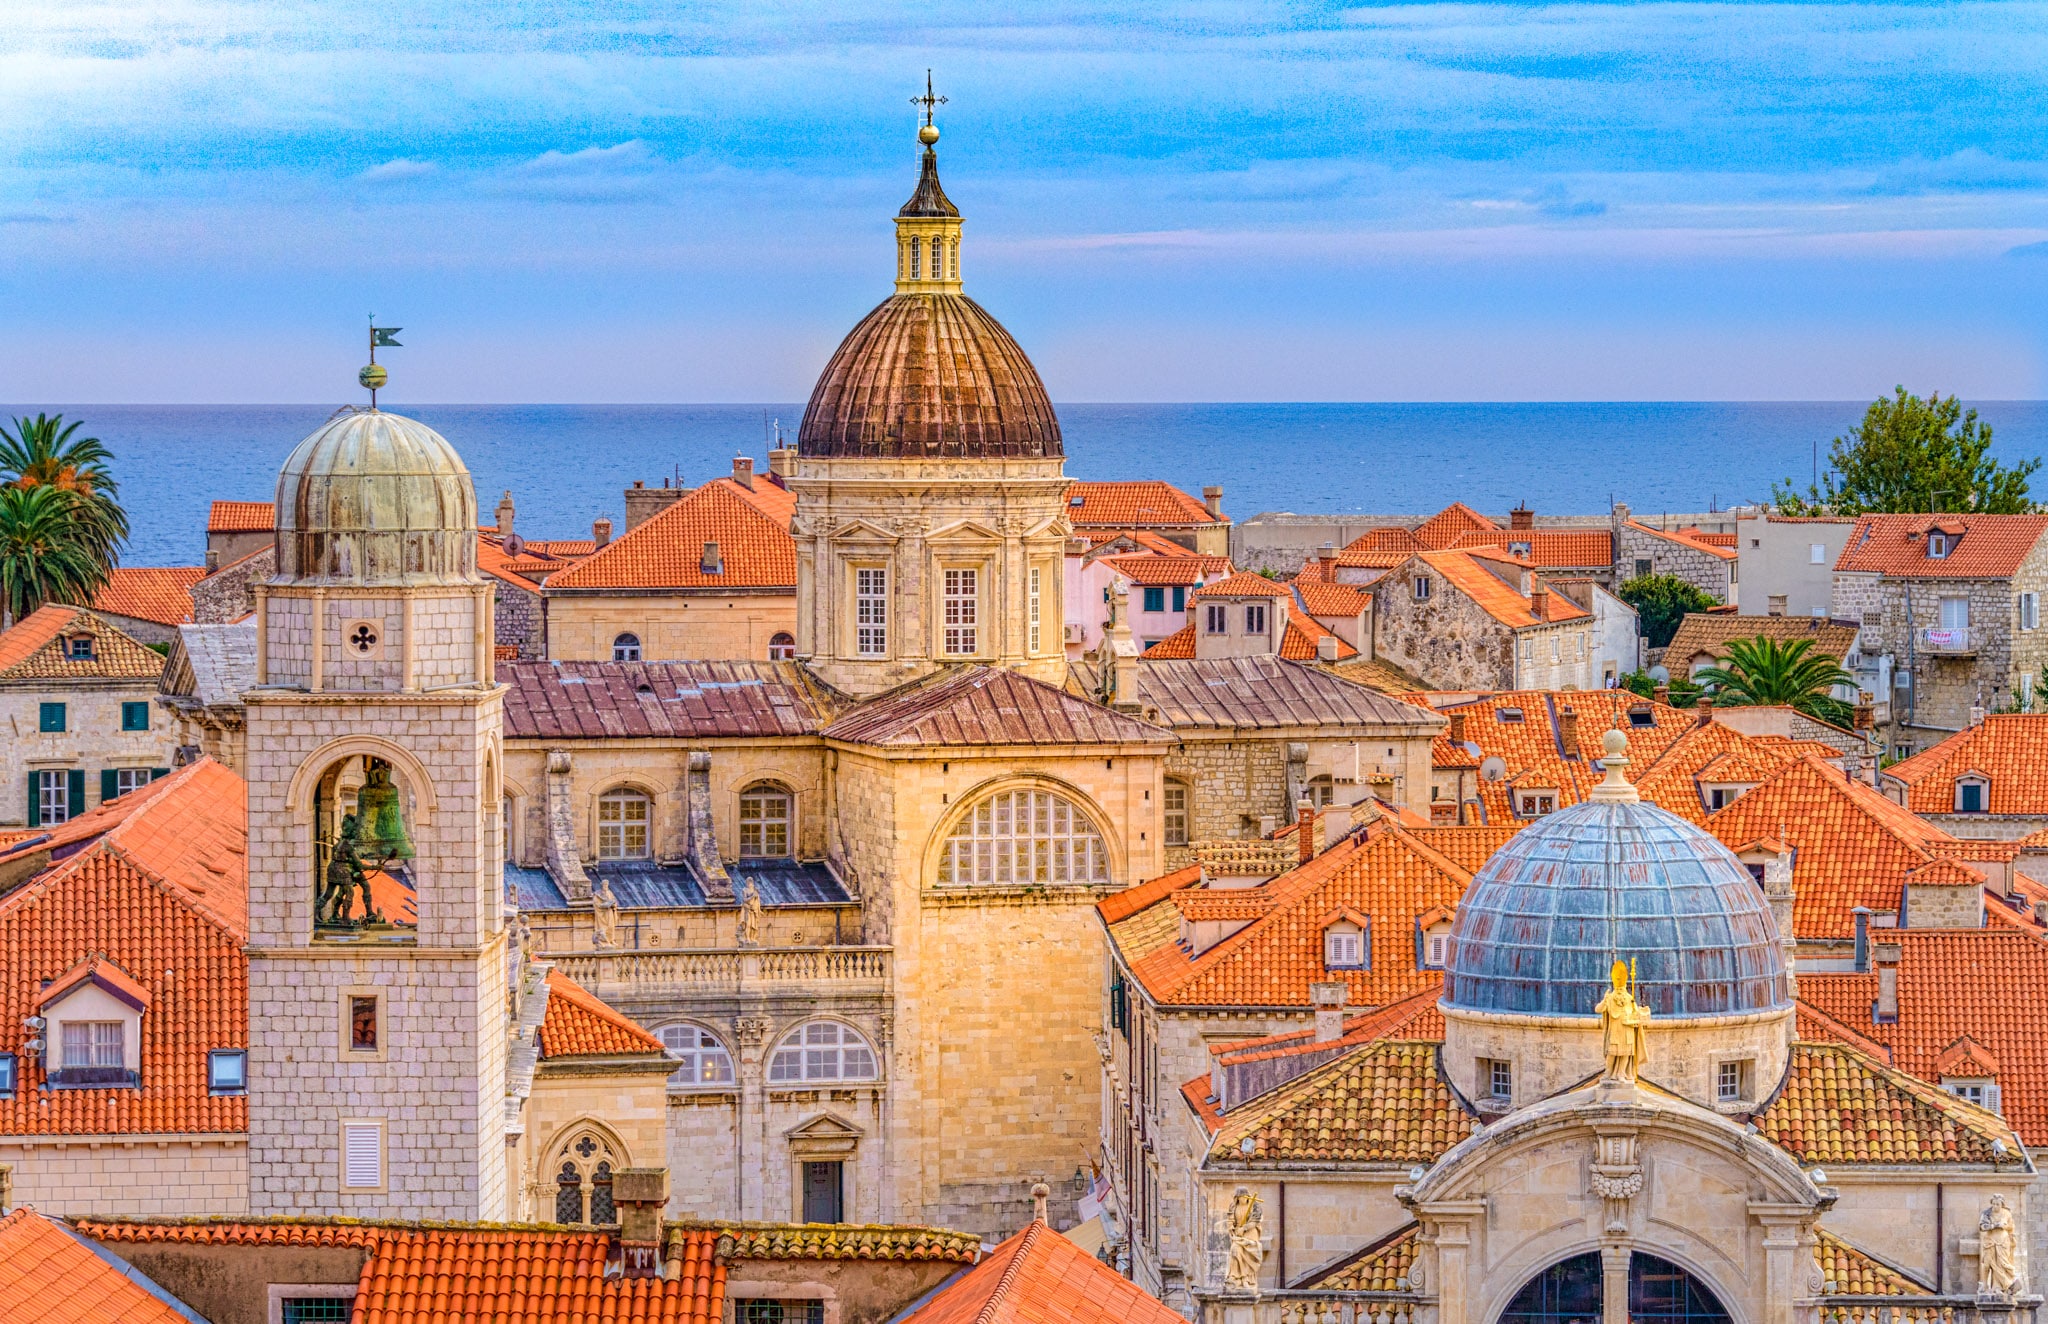 A view from Dubrovnik's city wall toward the Adriatic with the Church of St. Blaise, the Dubrovnik Clock Tower, and the Dubrovnik Cathedral in the foreground.